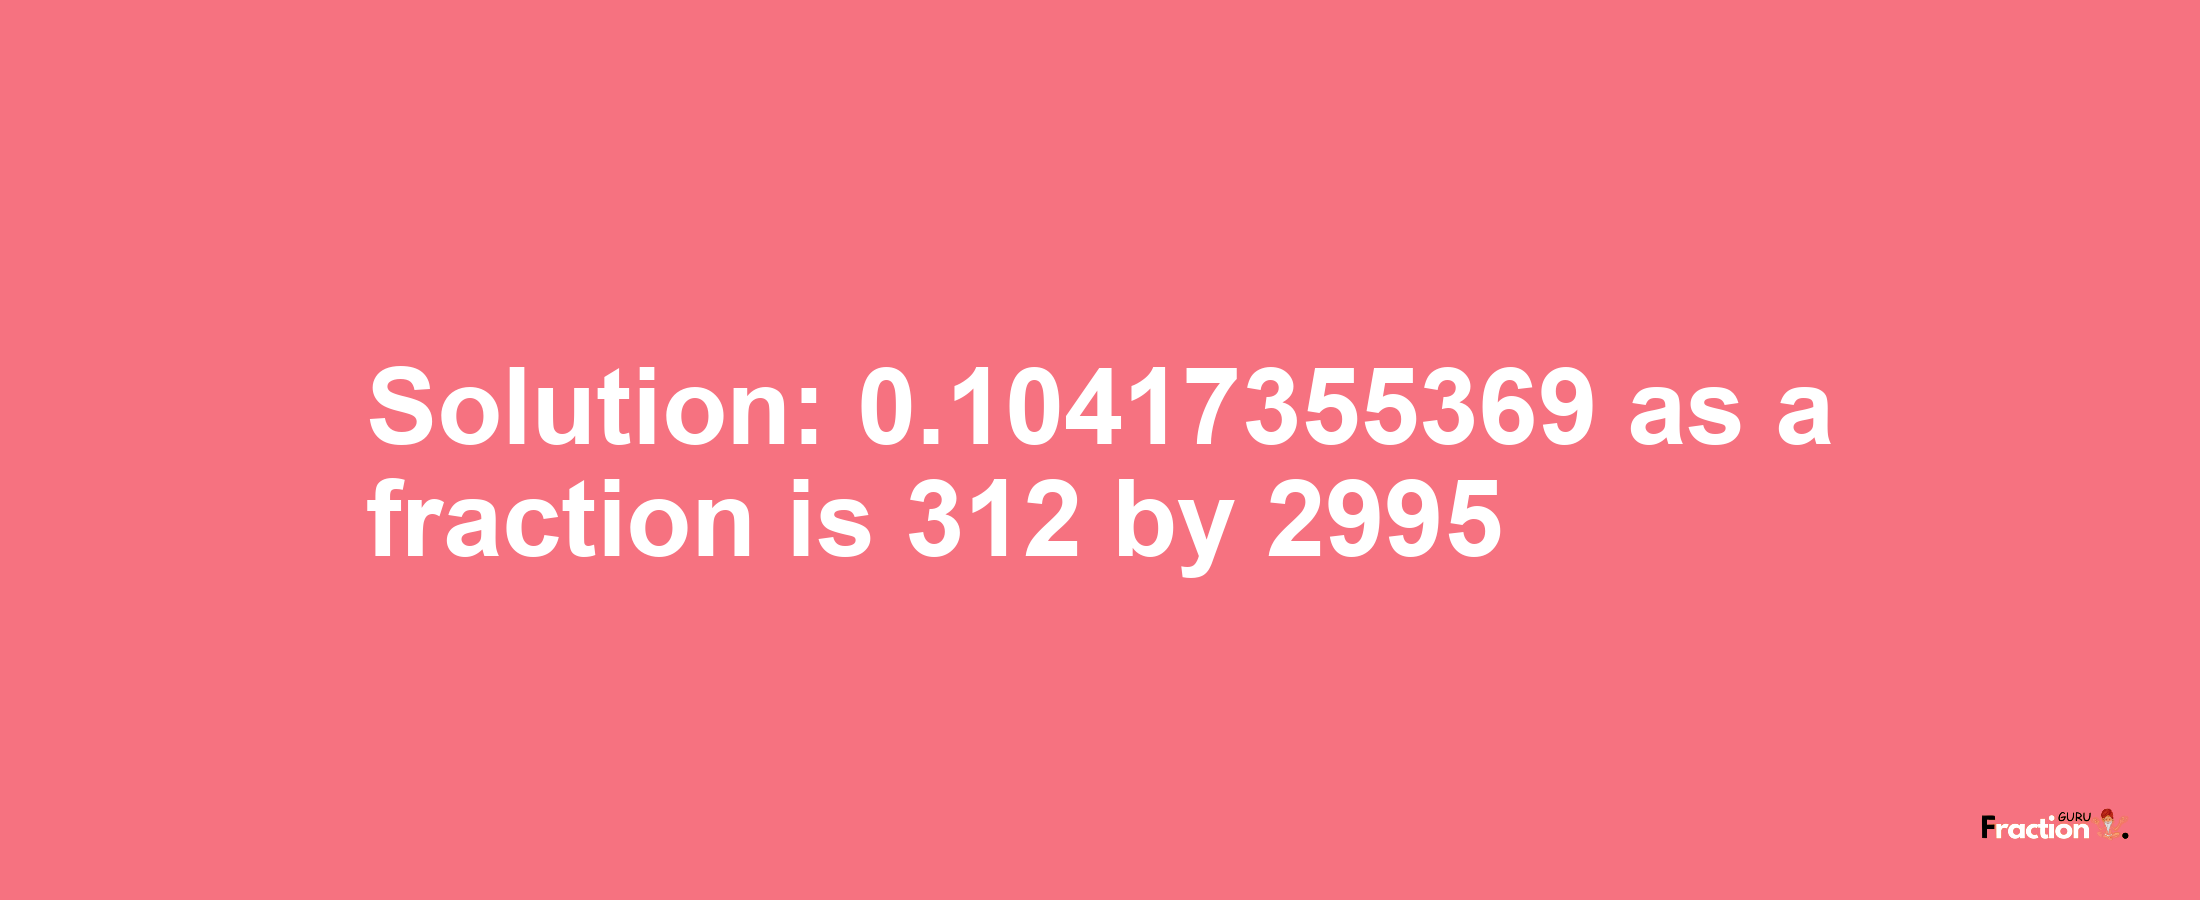 Solution:0.10417355369 as a fraction is 312/2995